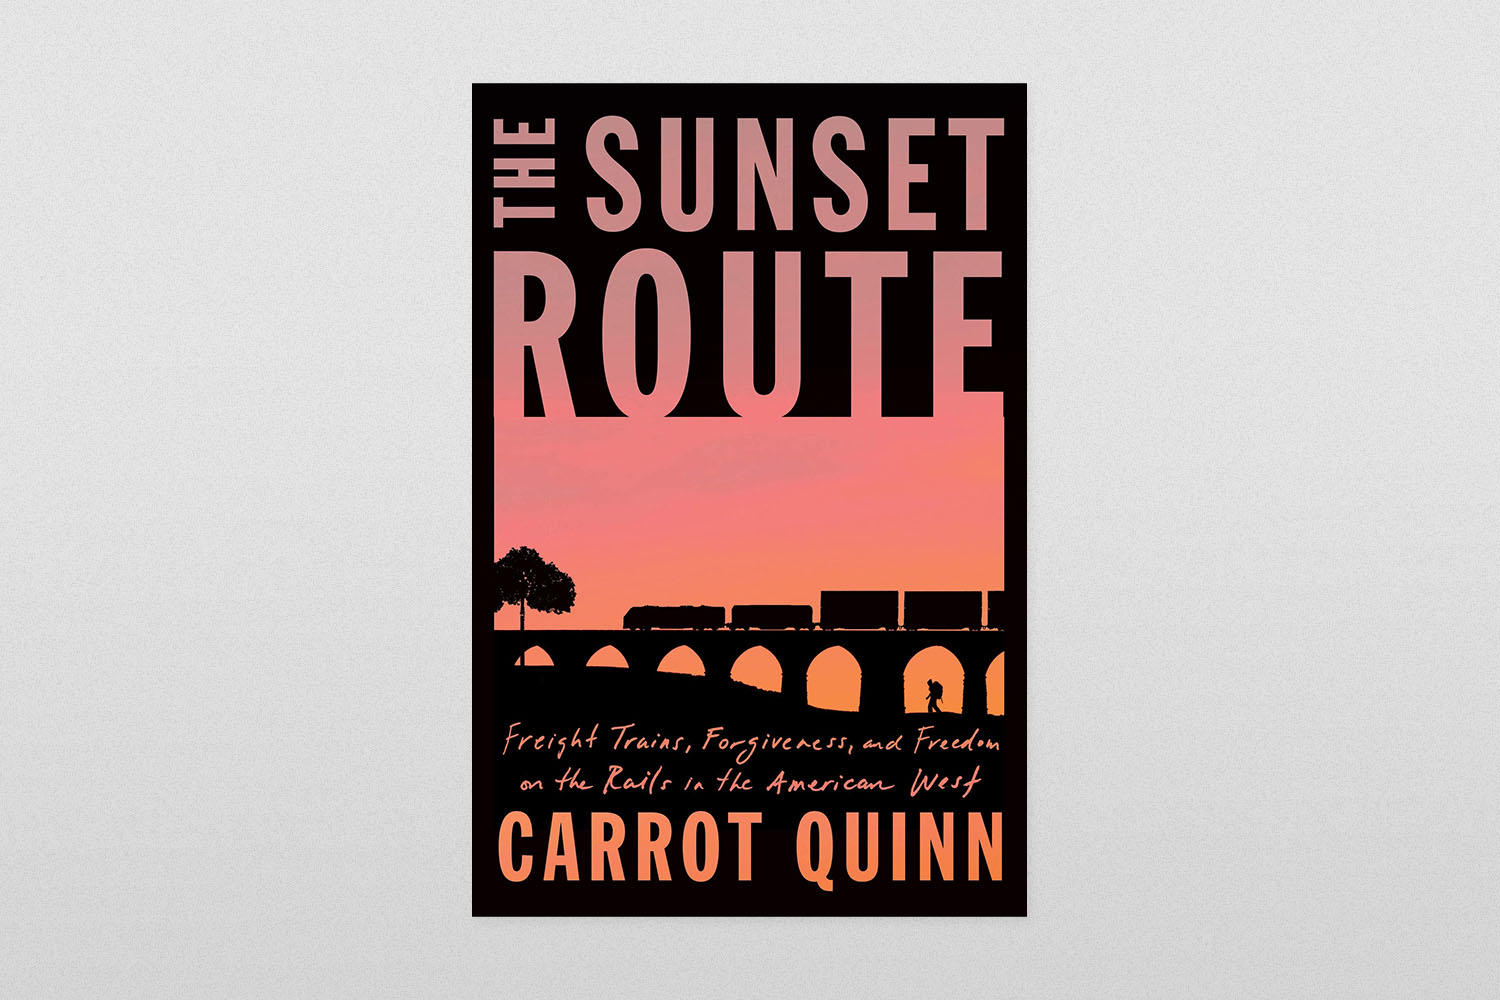 "The Sunset Route"